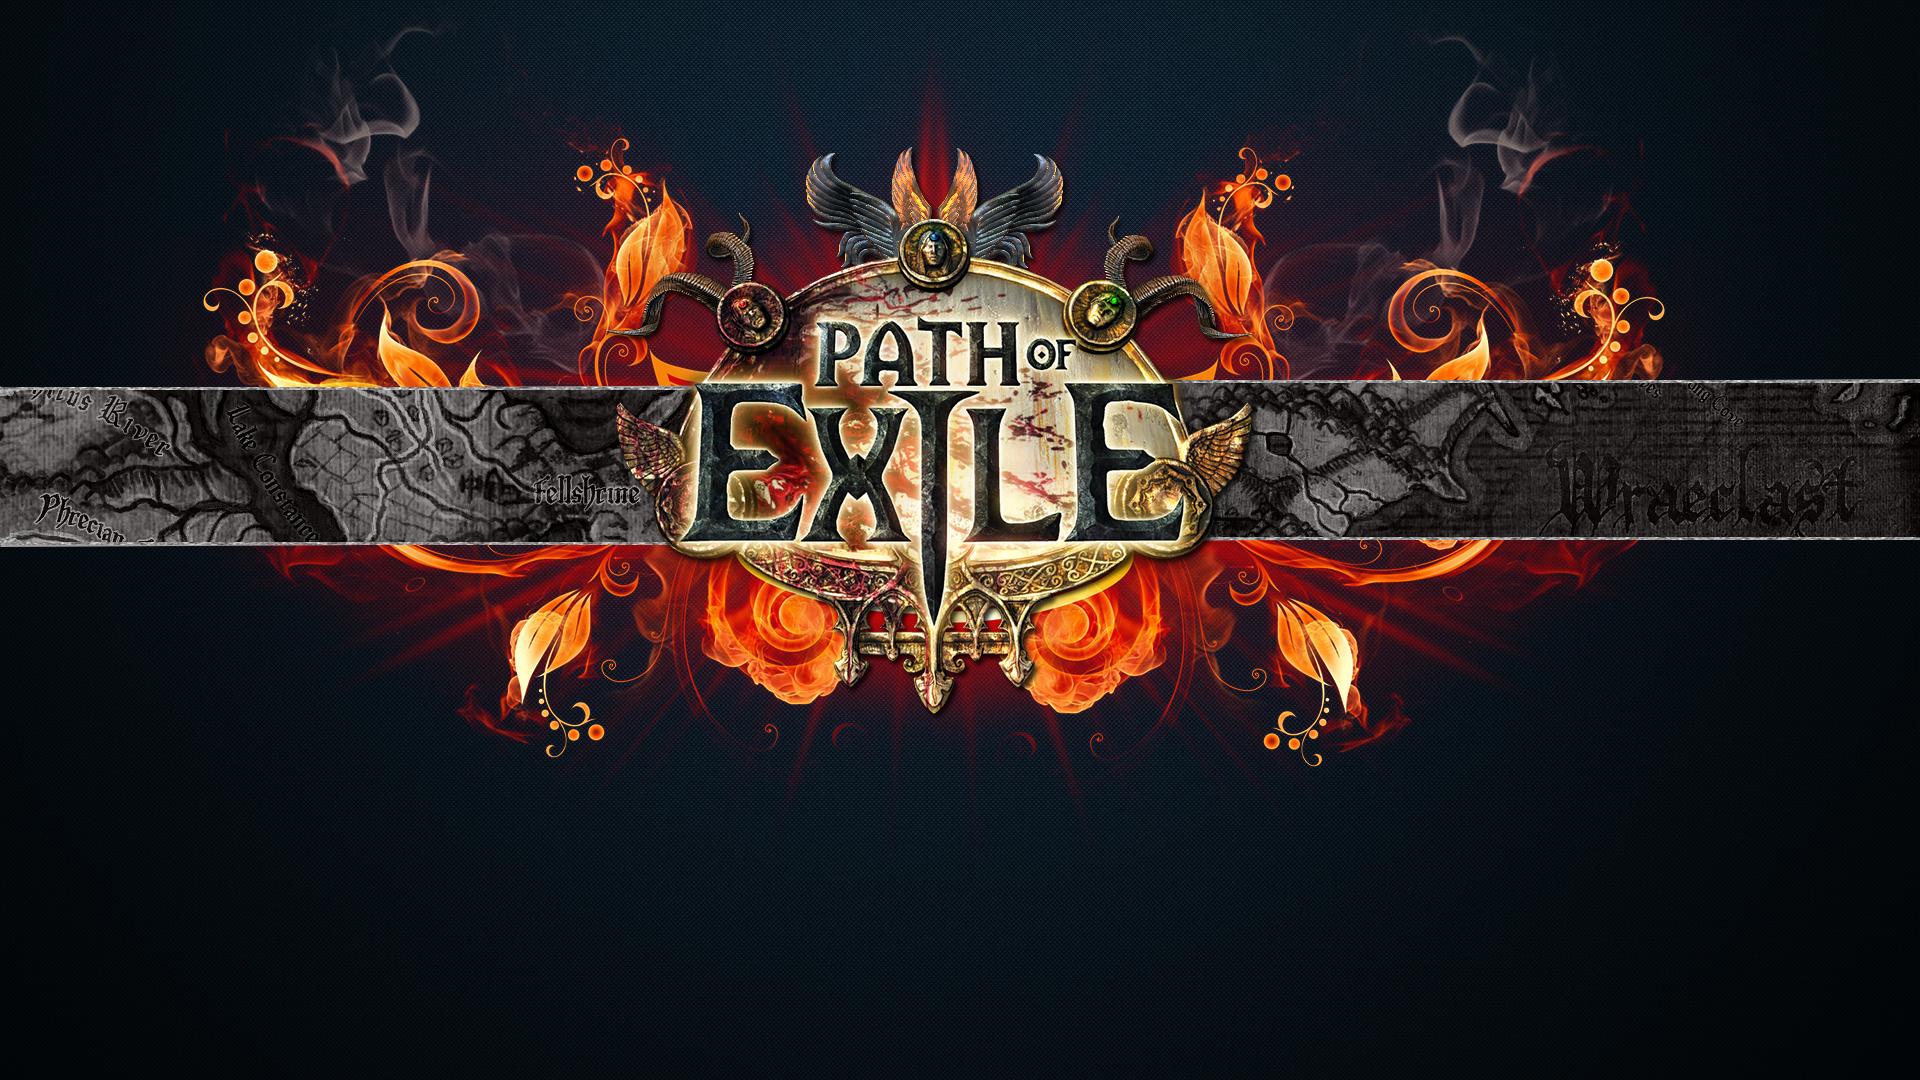 Game Mmorpg Path Of Exile 1920x1080